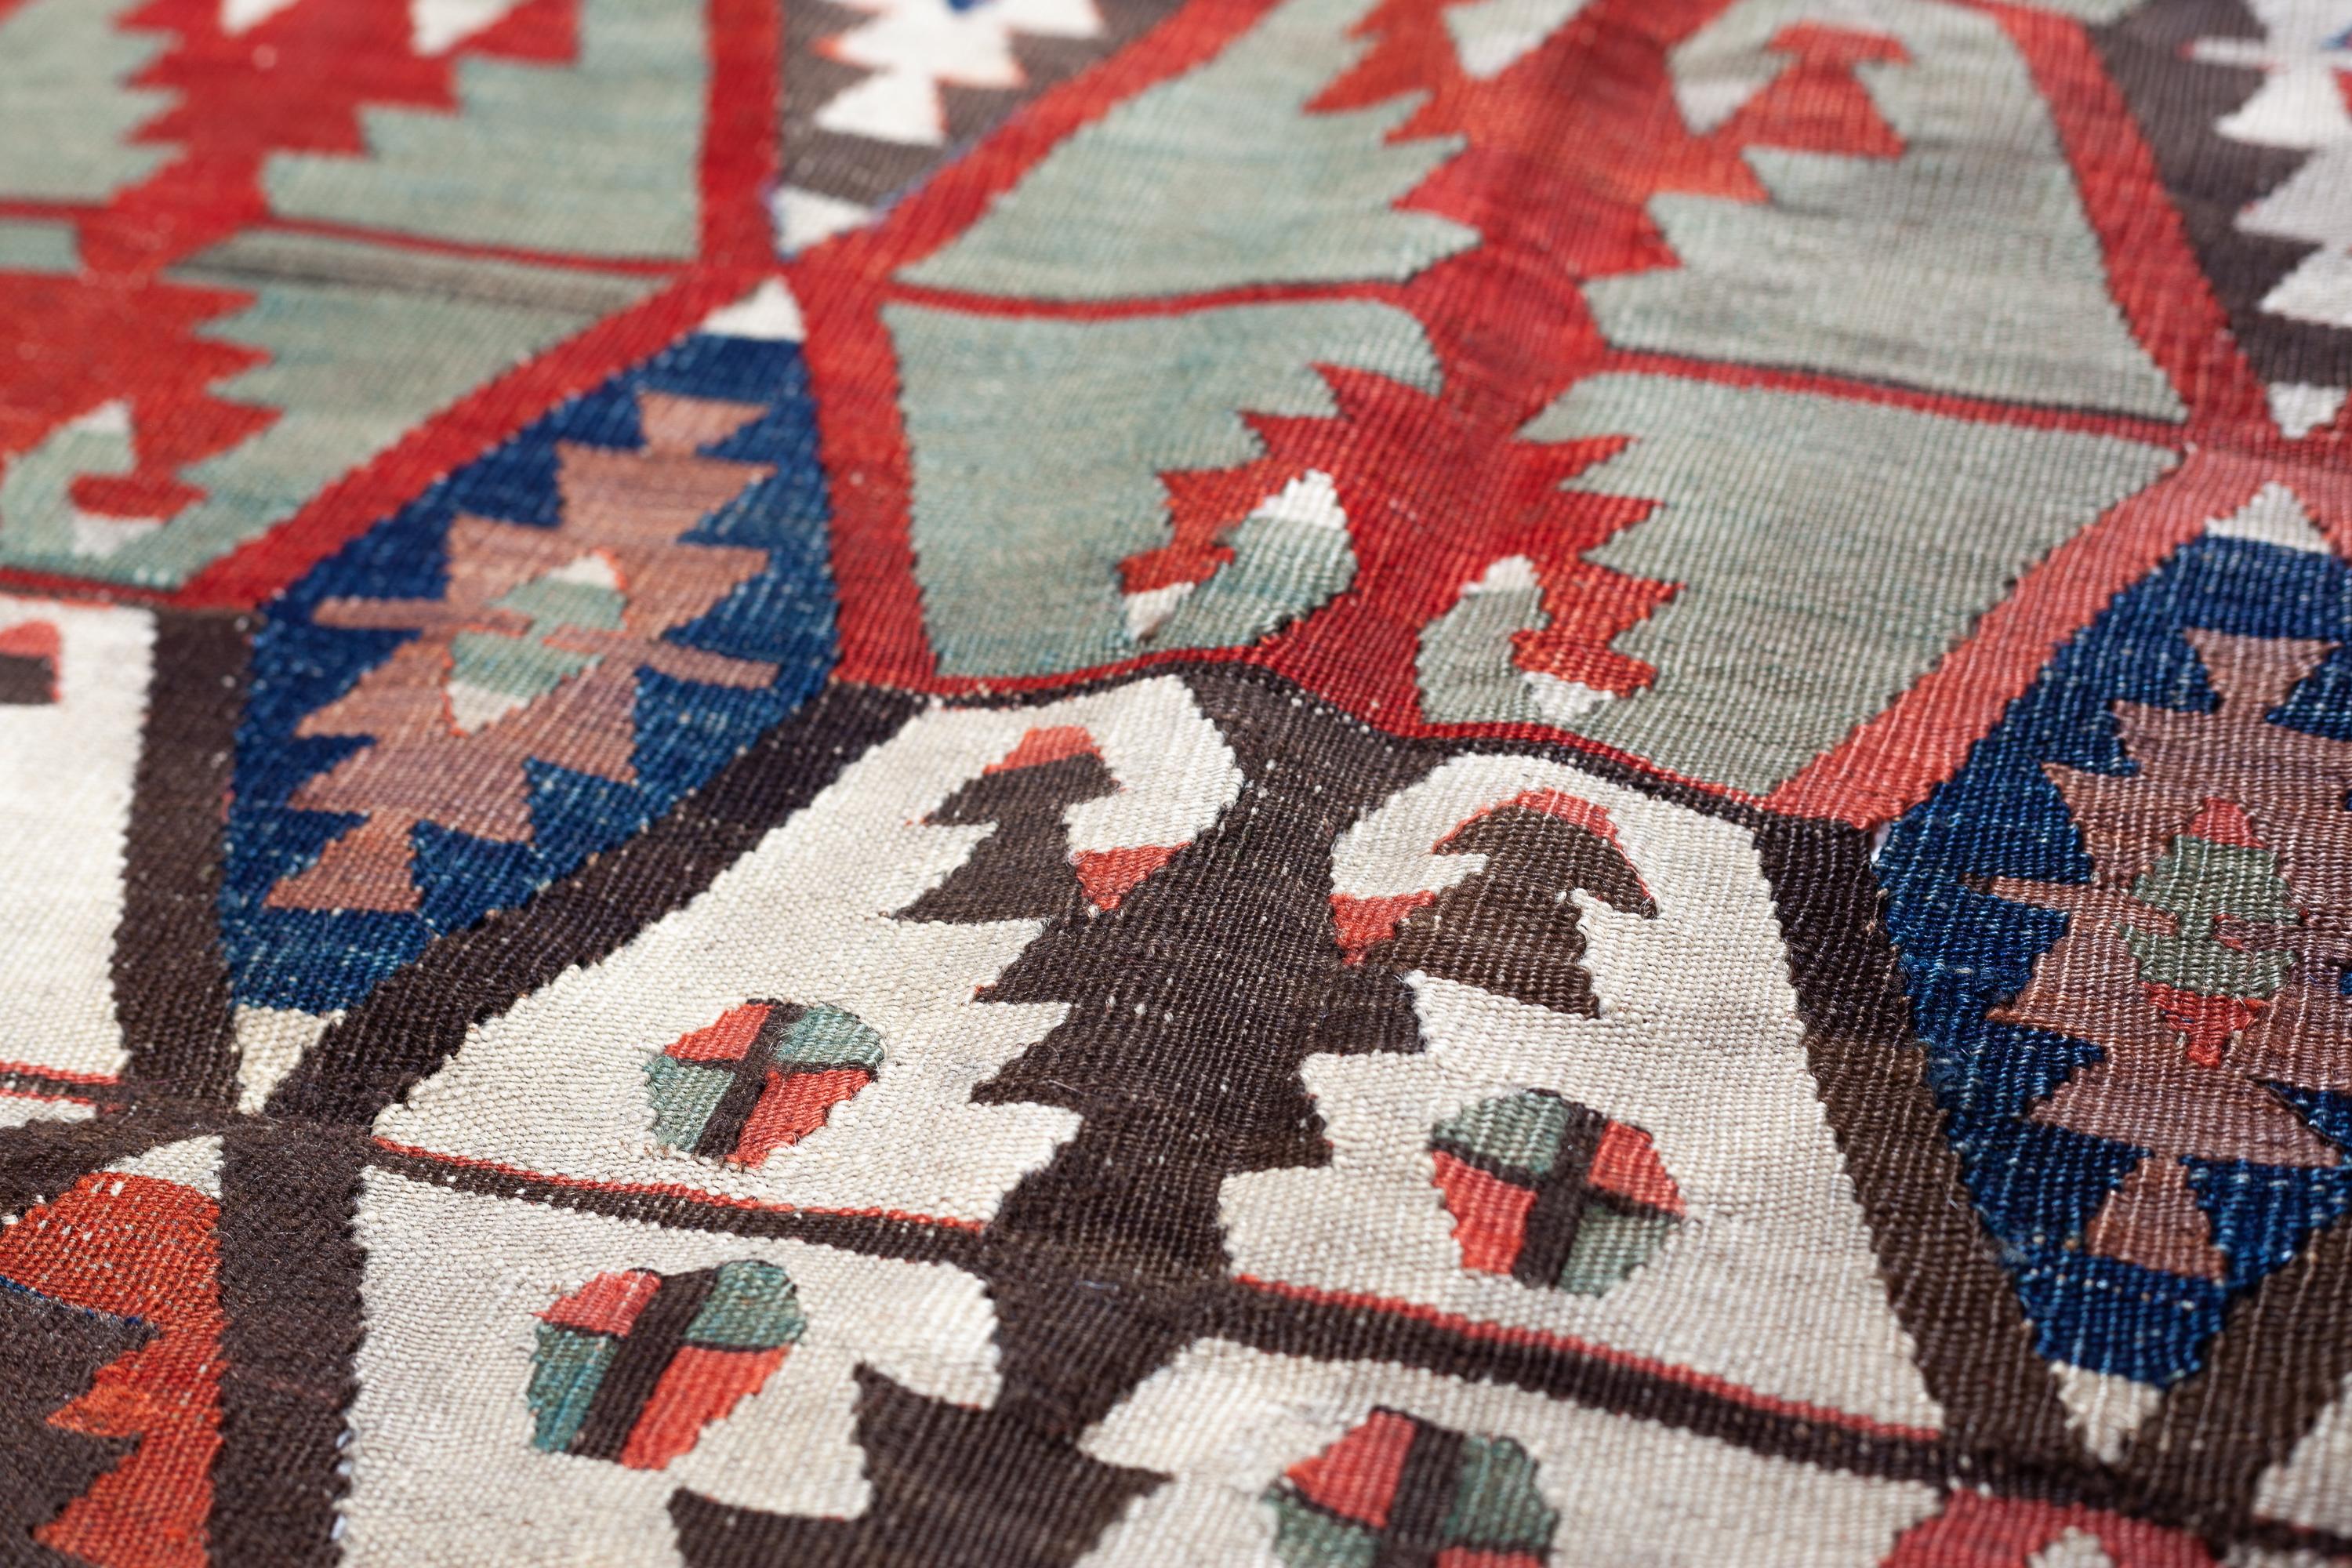 This is a Central Anatolian Old Kilim from the Konya region with a rare and beautiful color composition.

As early as the 13th century Marco Polo noted, in his account of his travels to the region, that superlative rugs were to be found in the